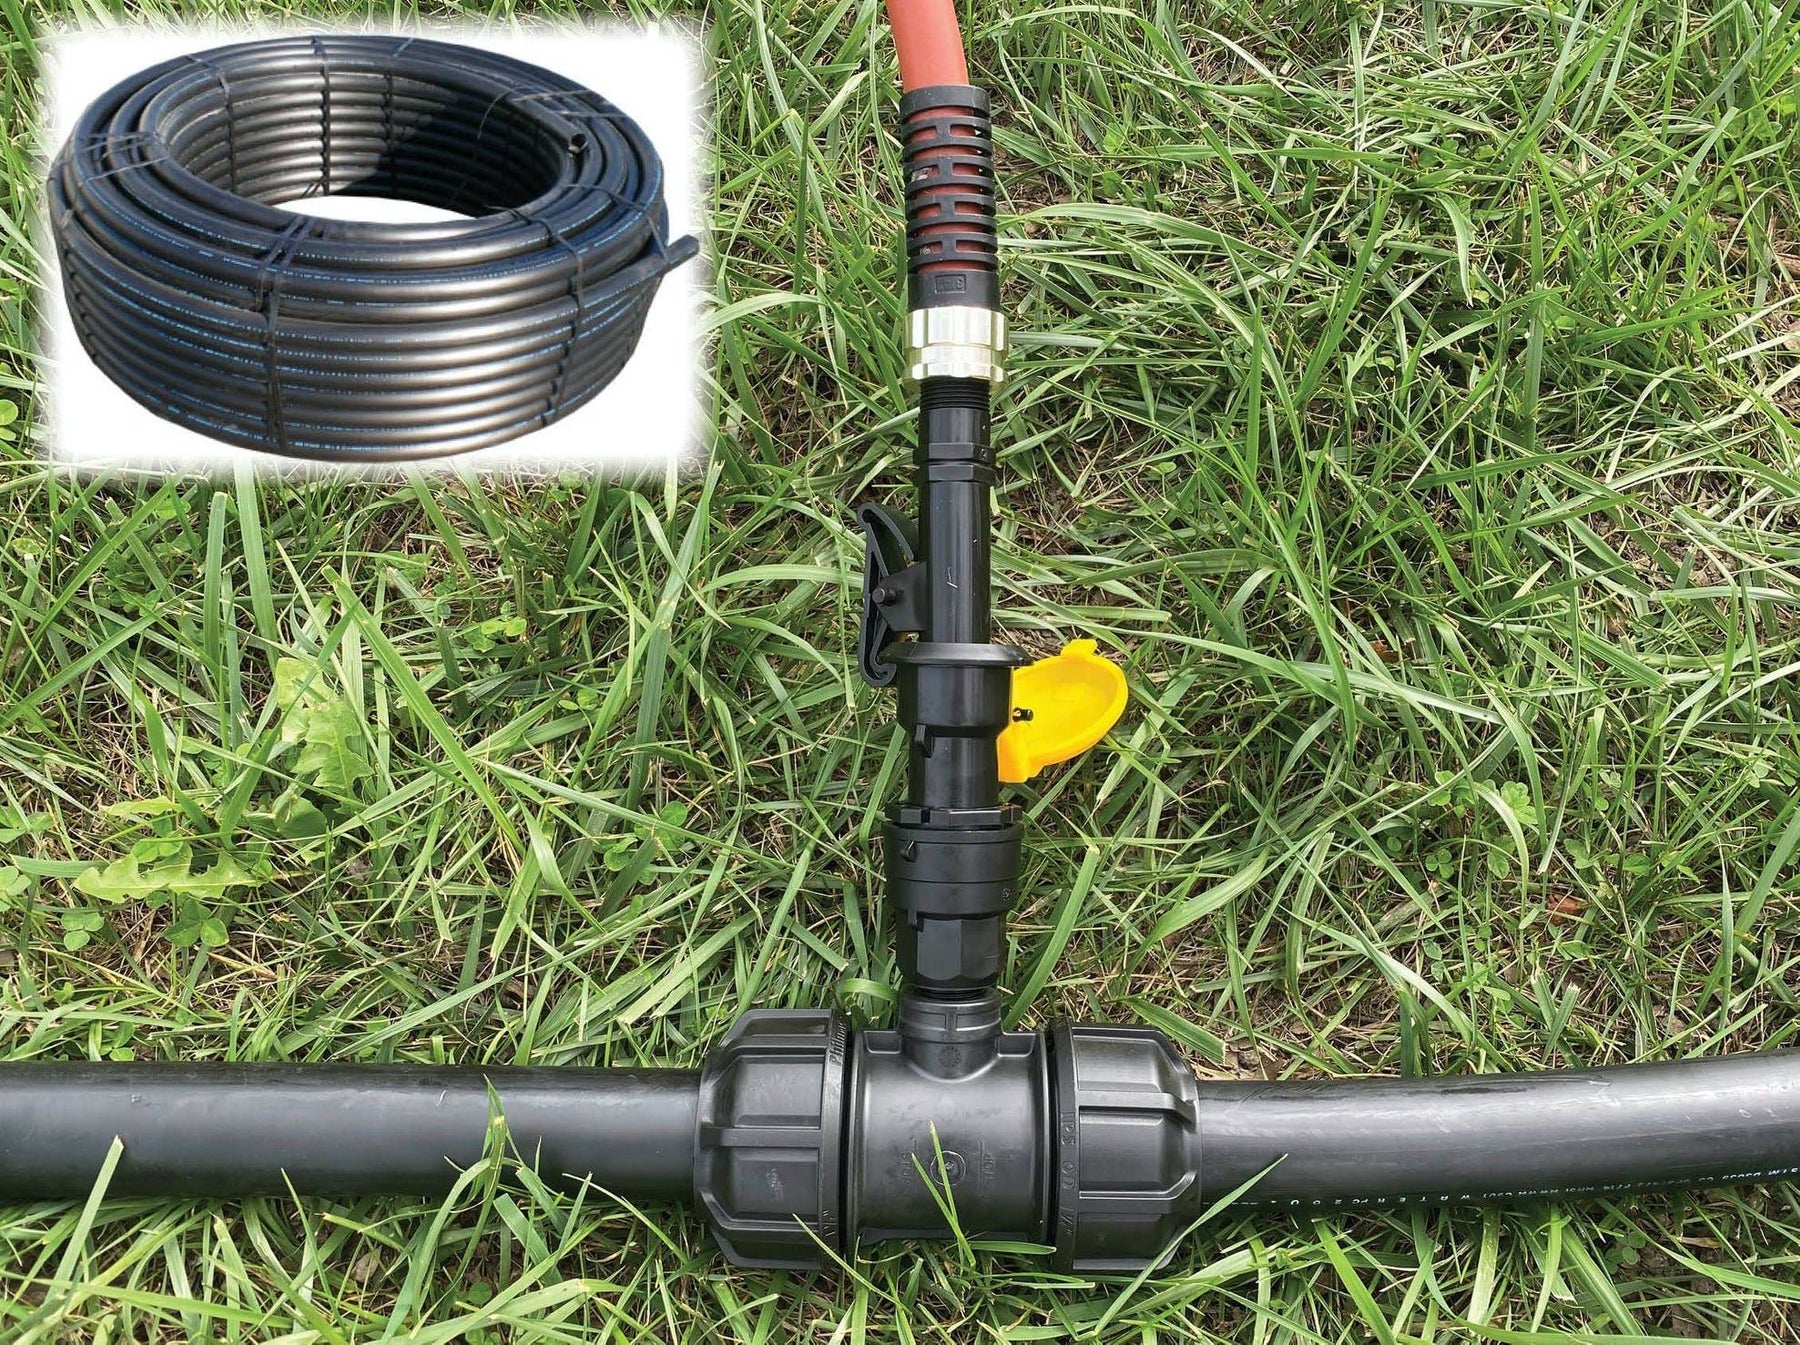 HDPE Water Pipe Installation Guide For Rotational Grazing - Powerflex